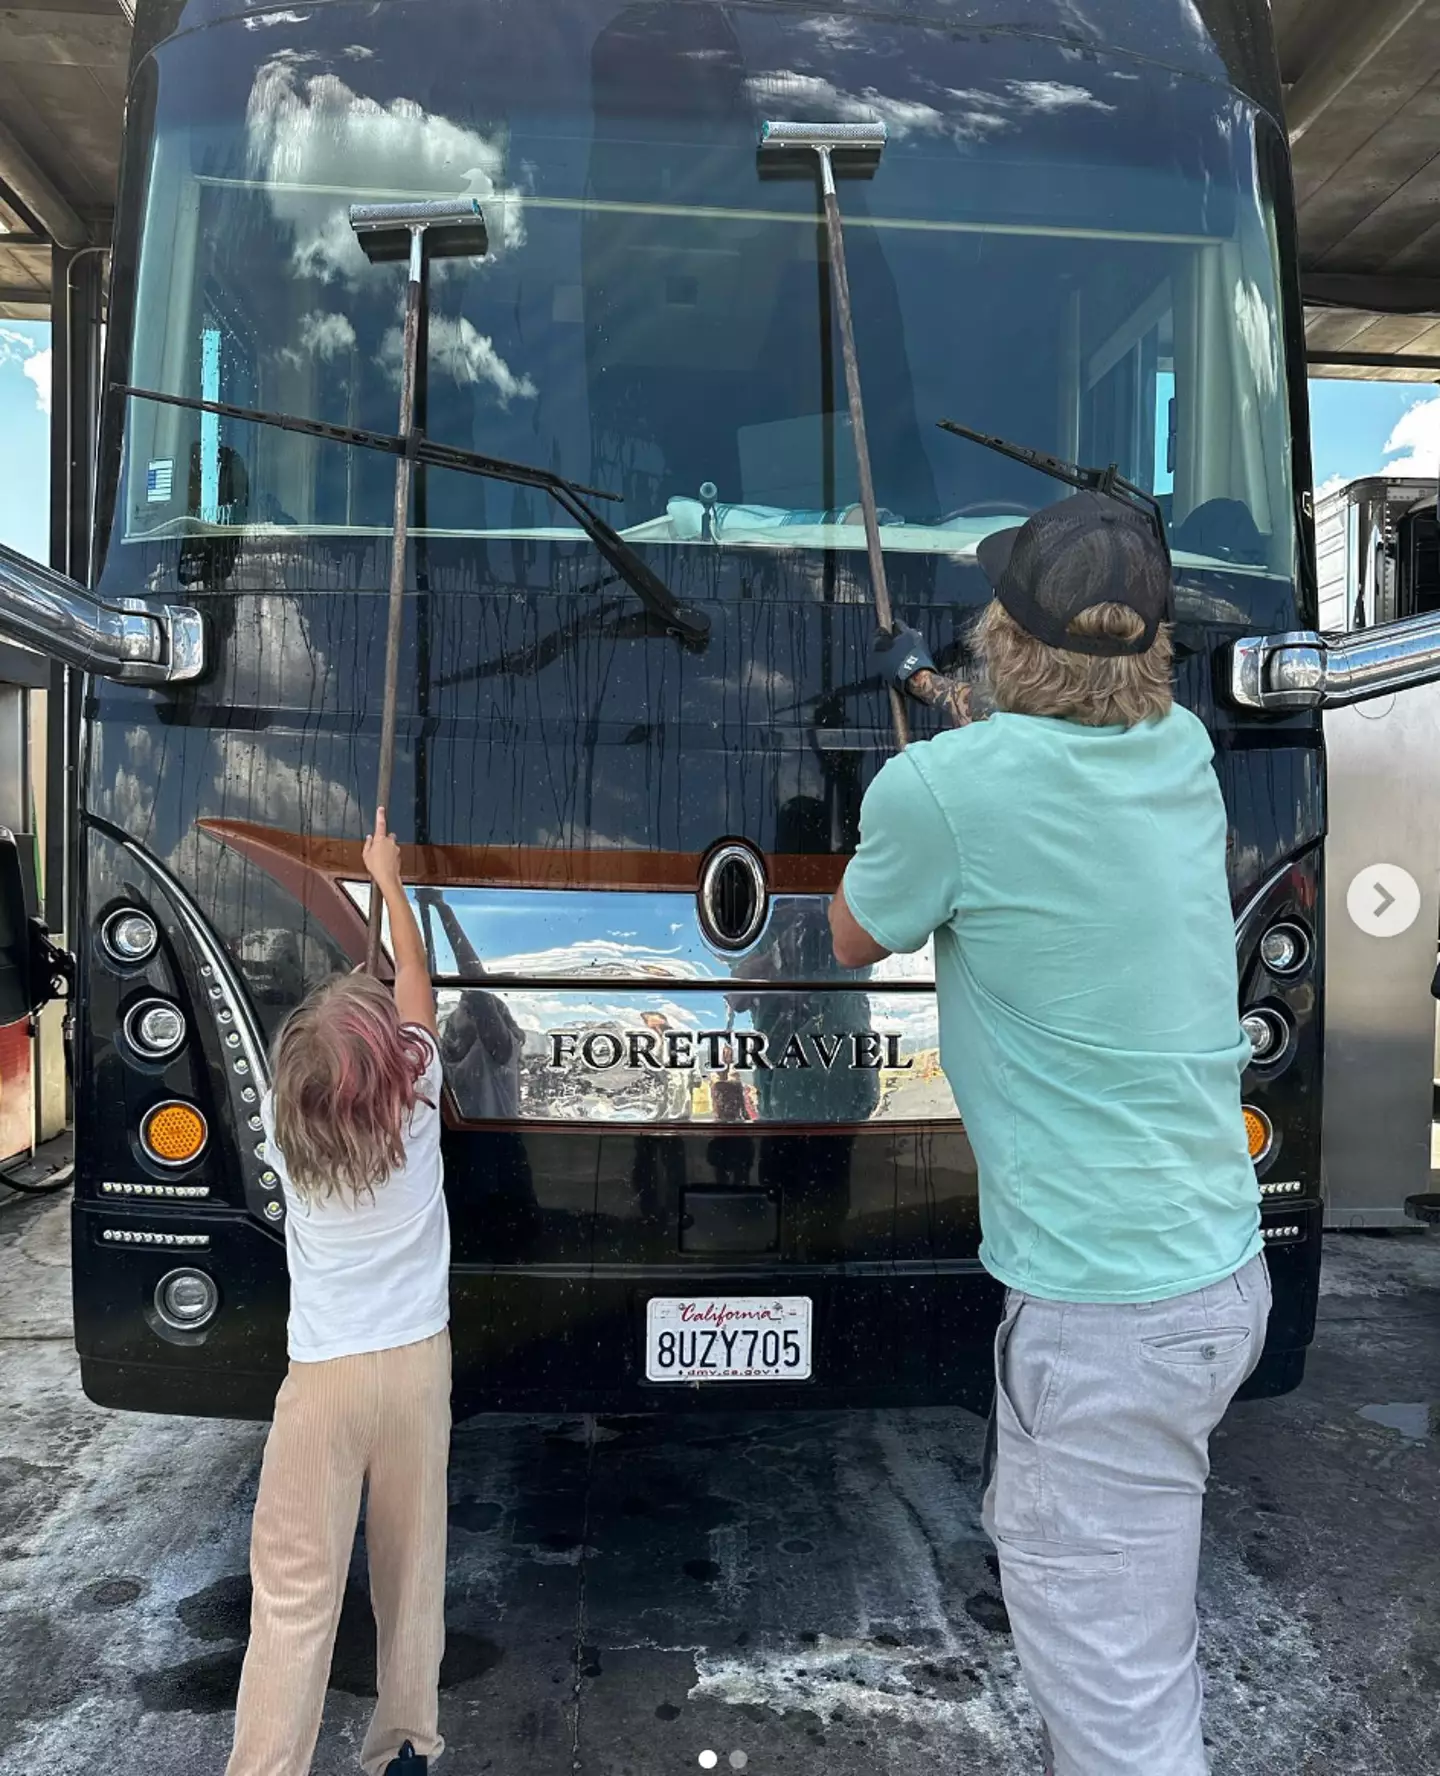 Dax and one of his children cleaning an RV.